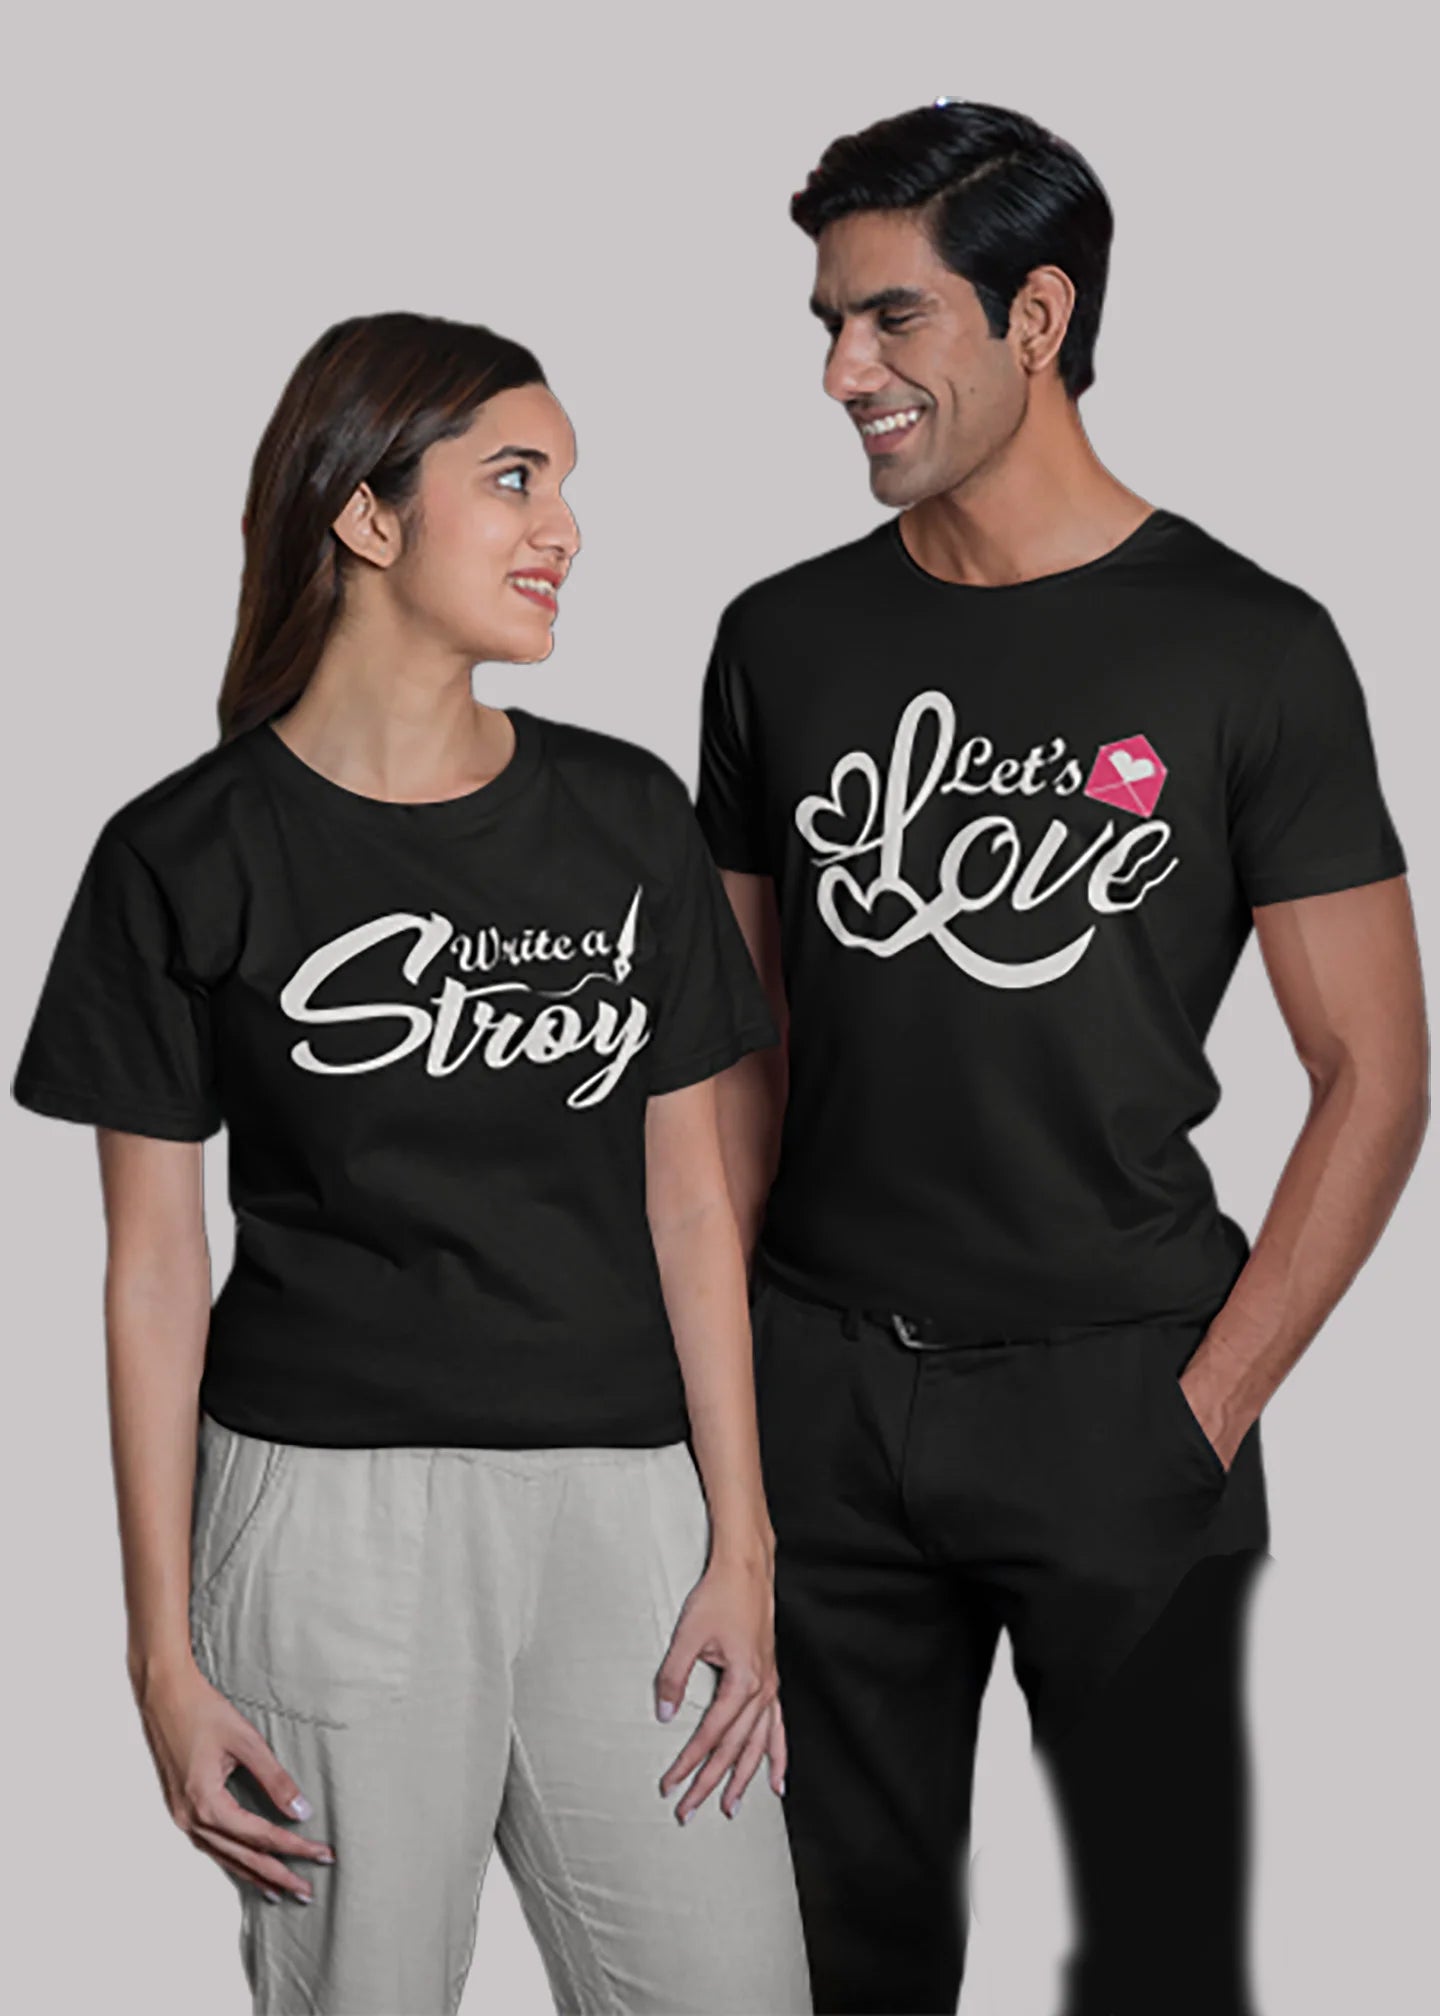 Lets love write a story Printed Couple T-shirt